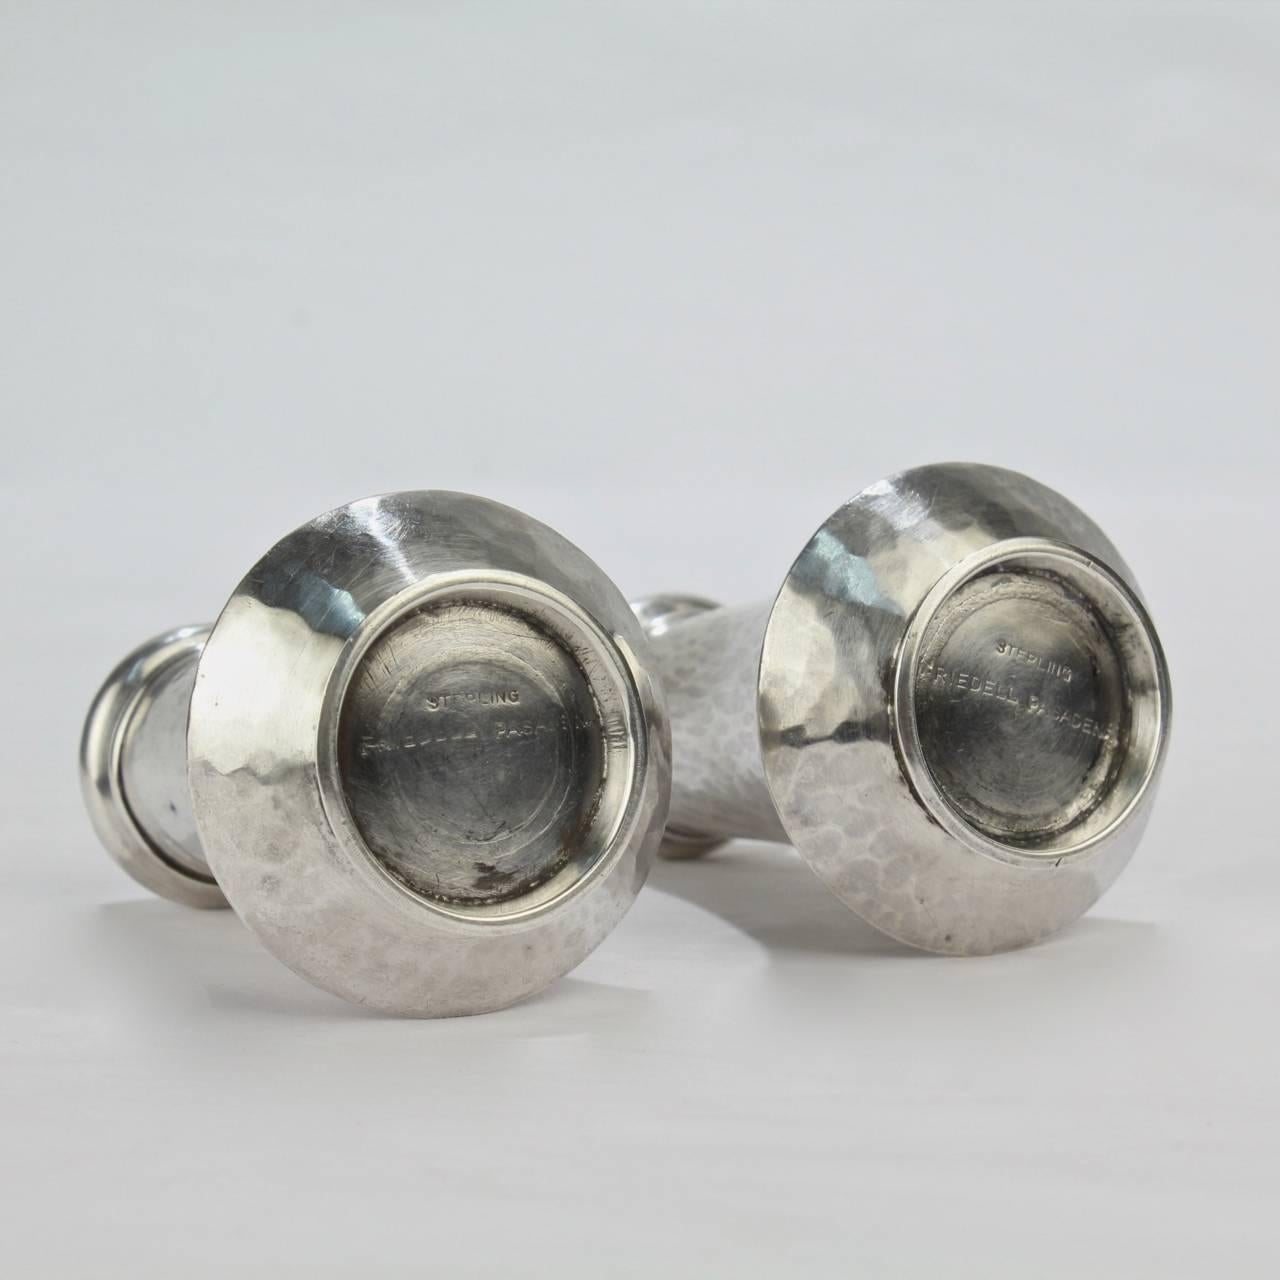 Pair of Arts & Crafts Sterling Silver Salt and Pepper Shakers, Clemens Friedell 1